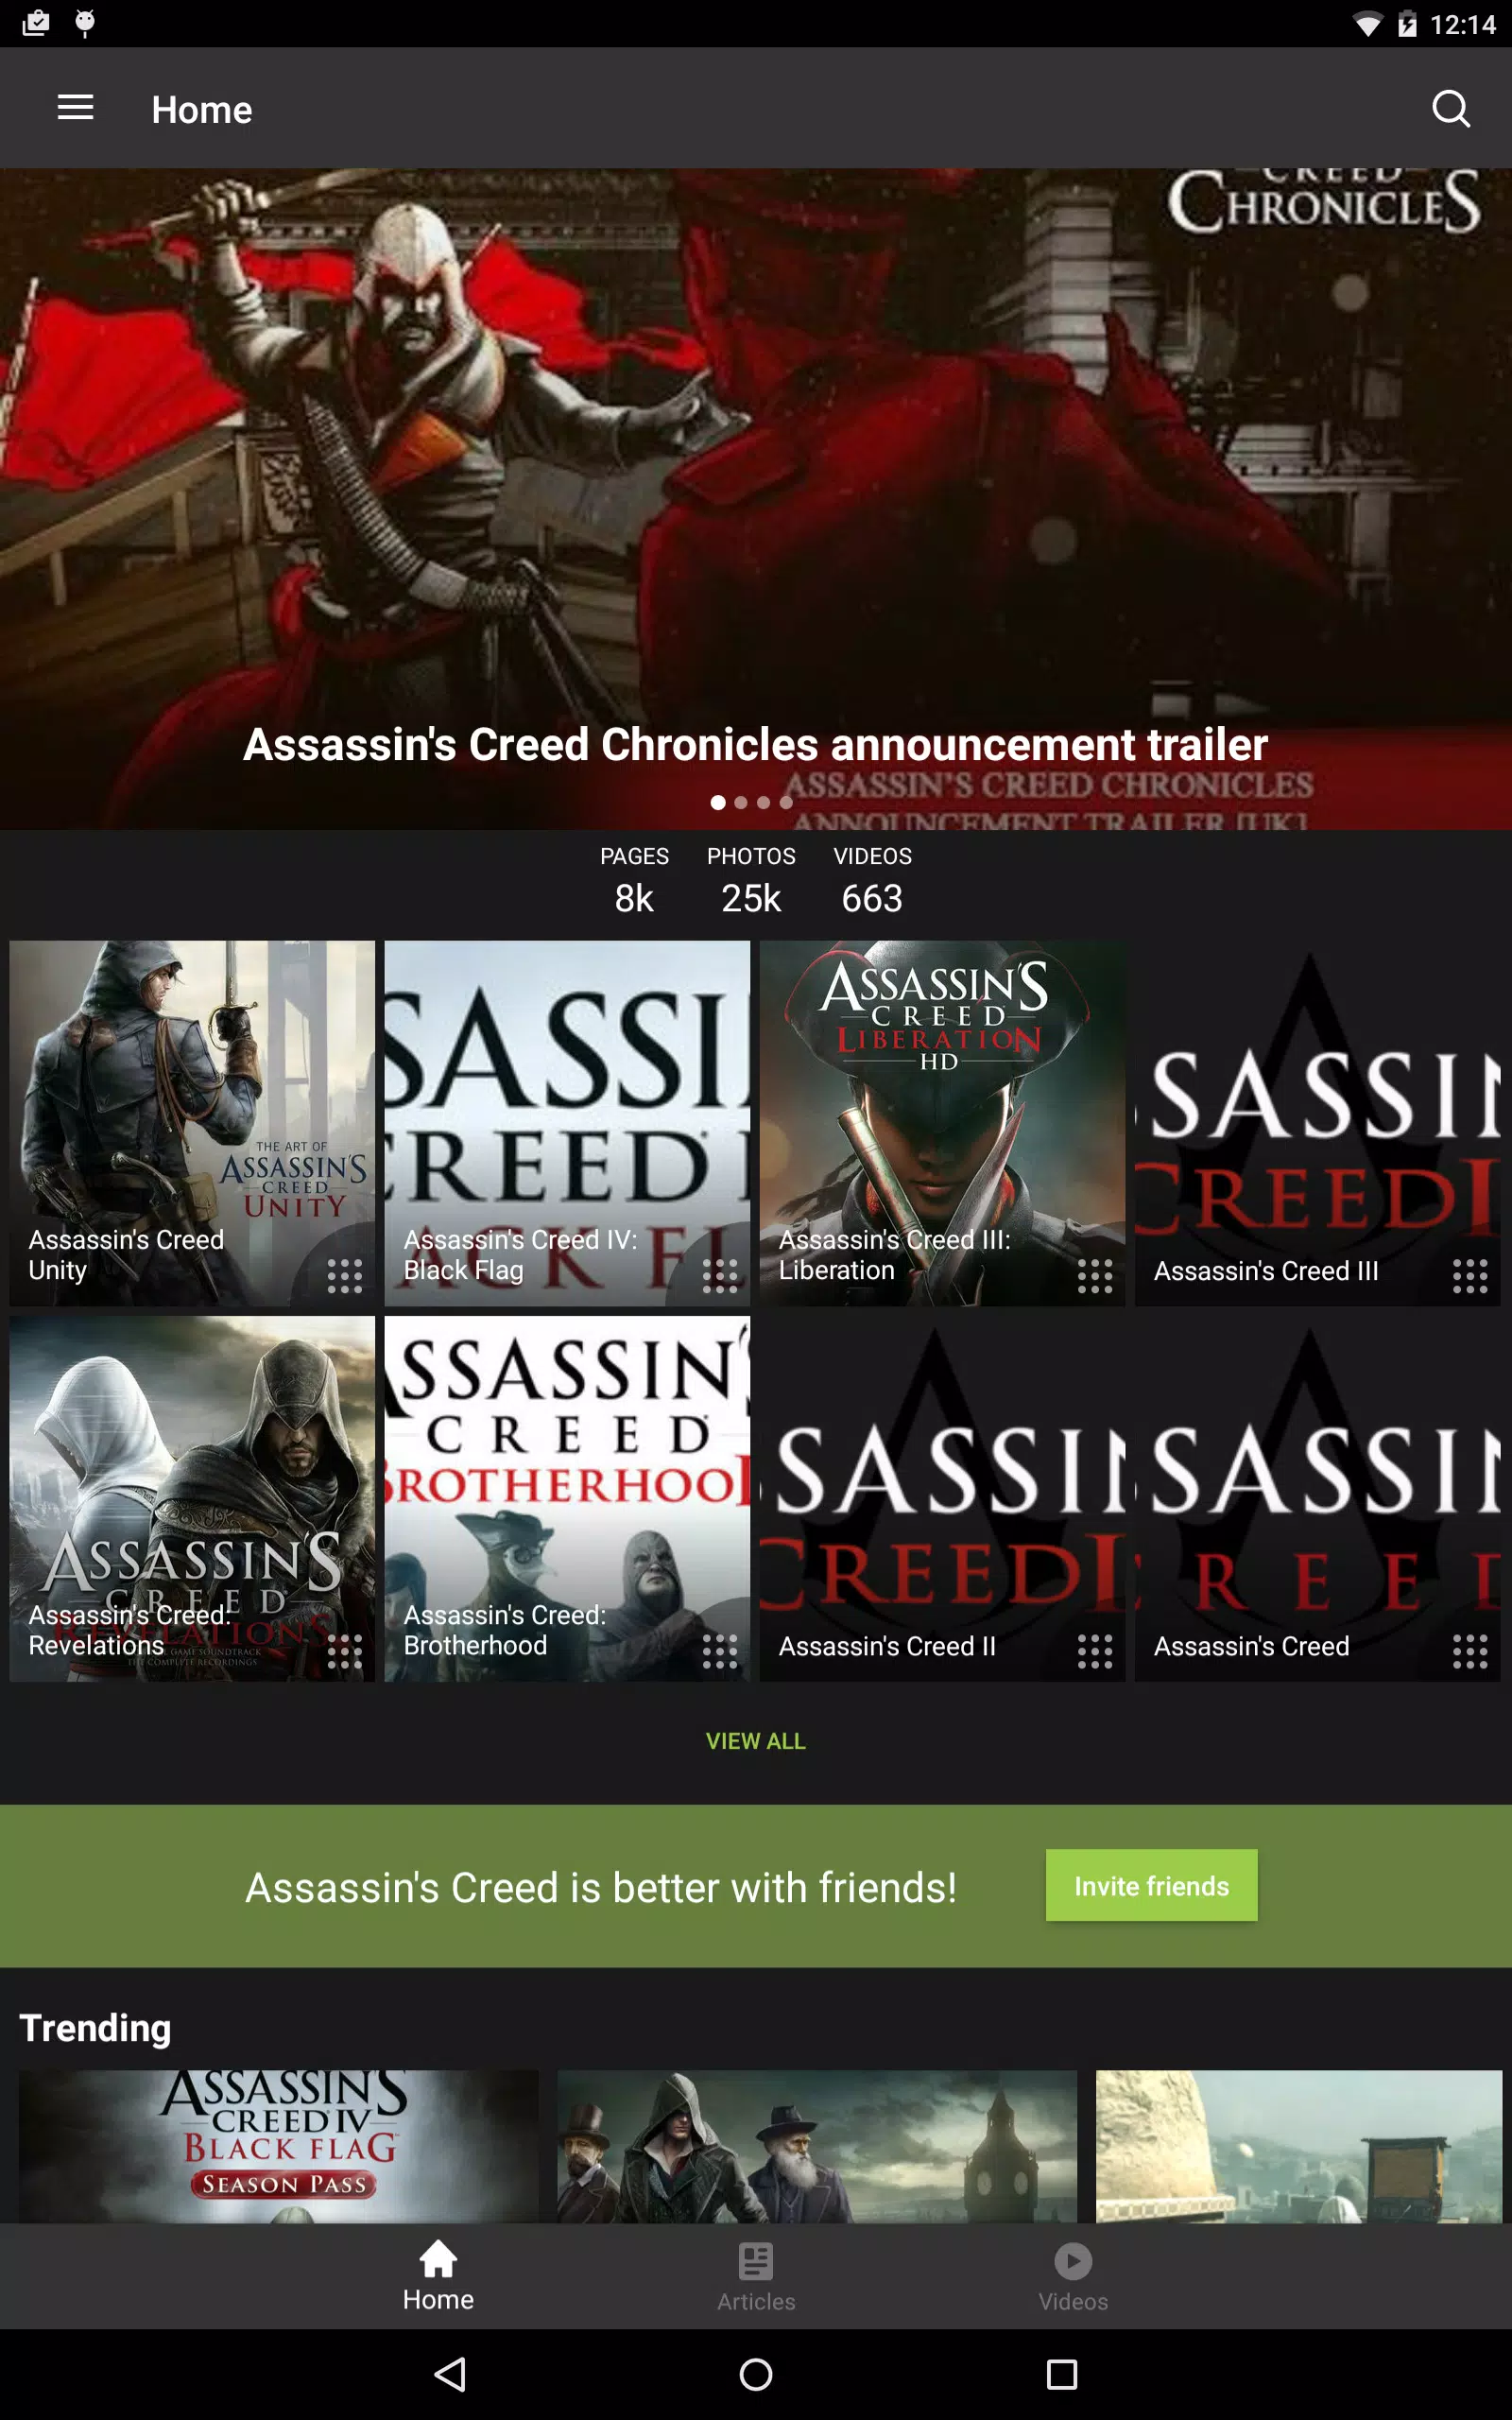 FANDOM for: Assassin's Creed for Android - APK Download